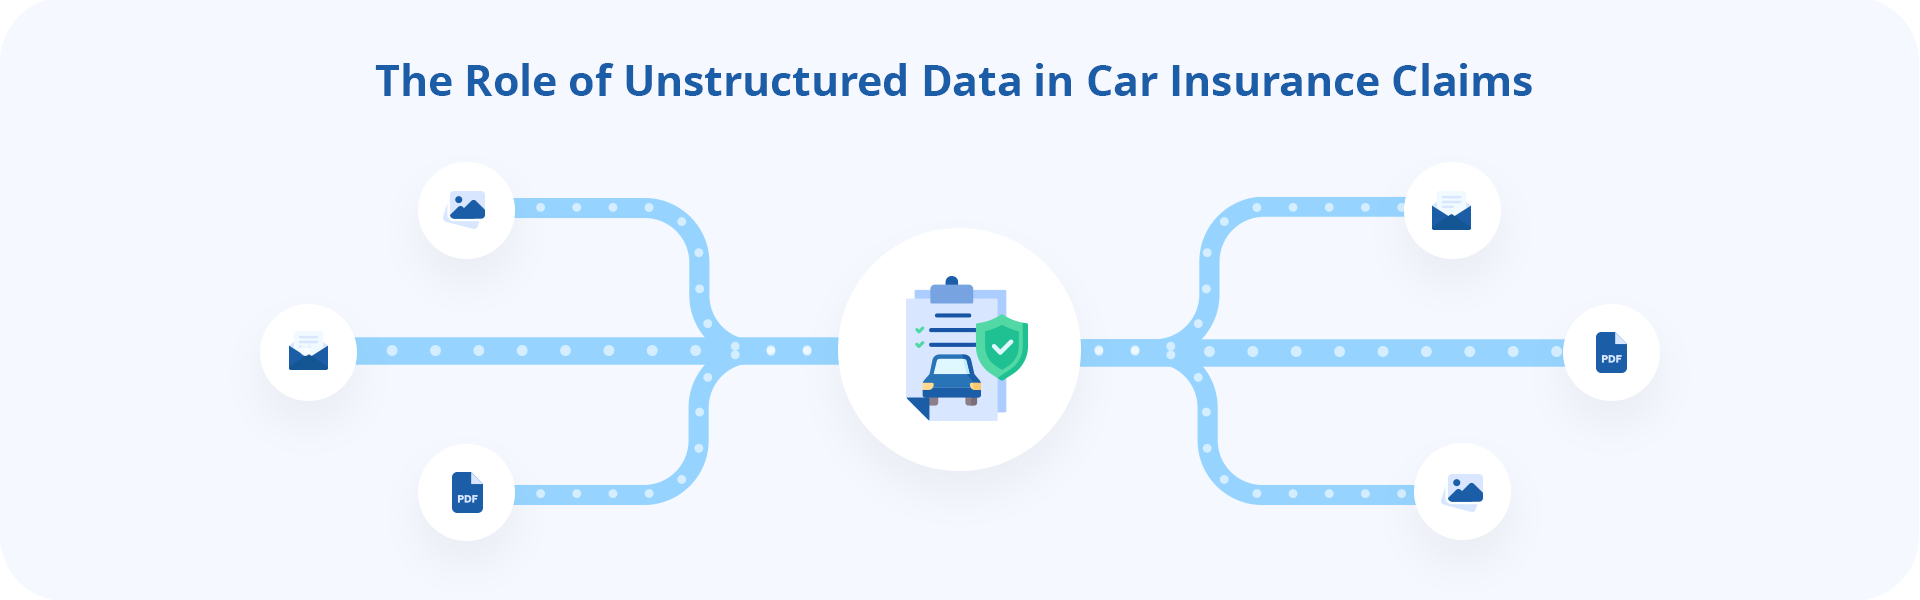 Unstructured Data in Car Insurance Claims 